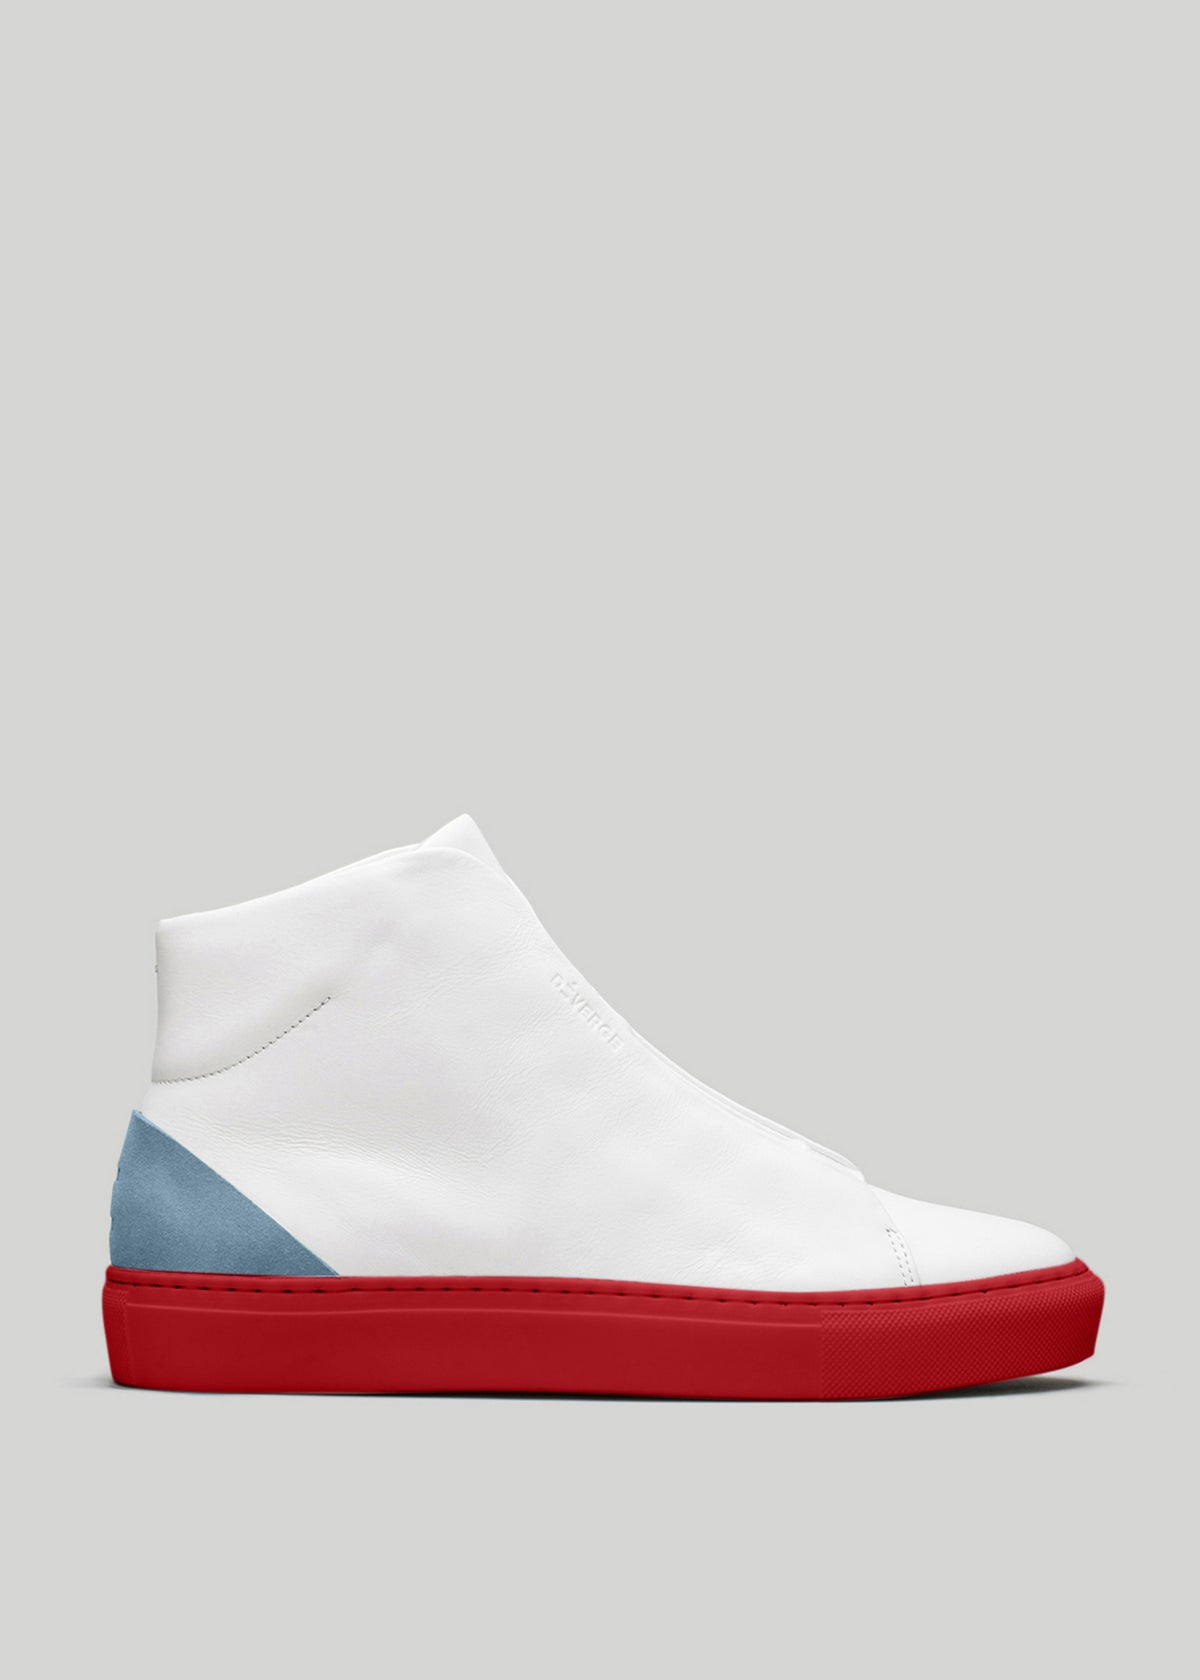 V28 Artic Blue W/ Red leather high-top sneaker, displayed against a gray background.